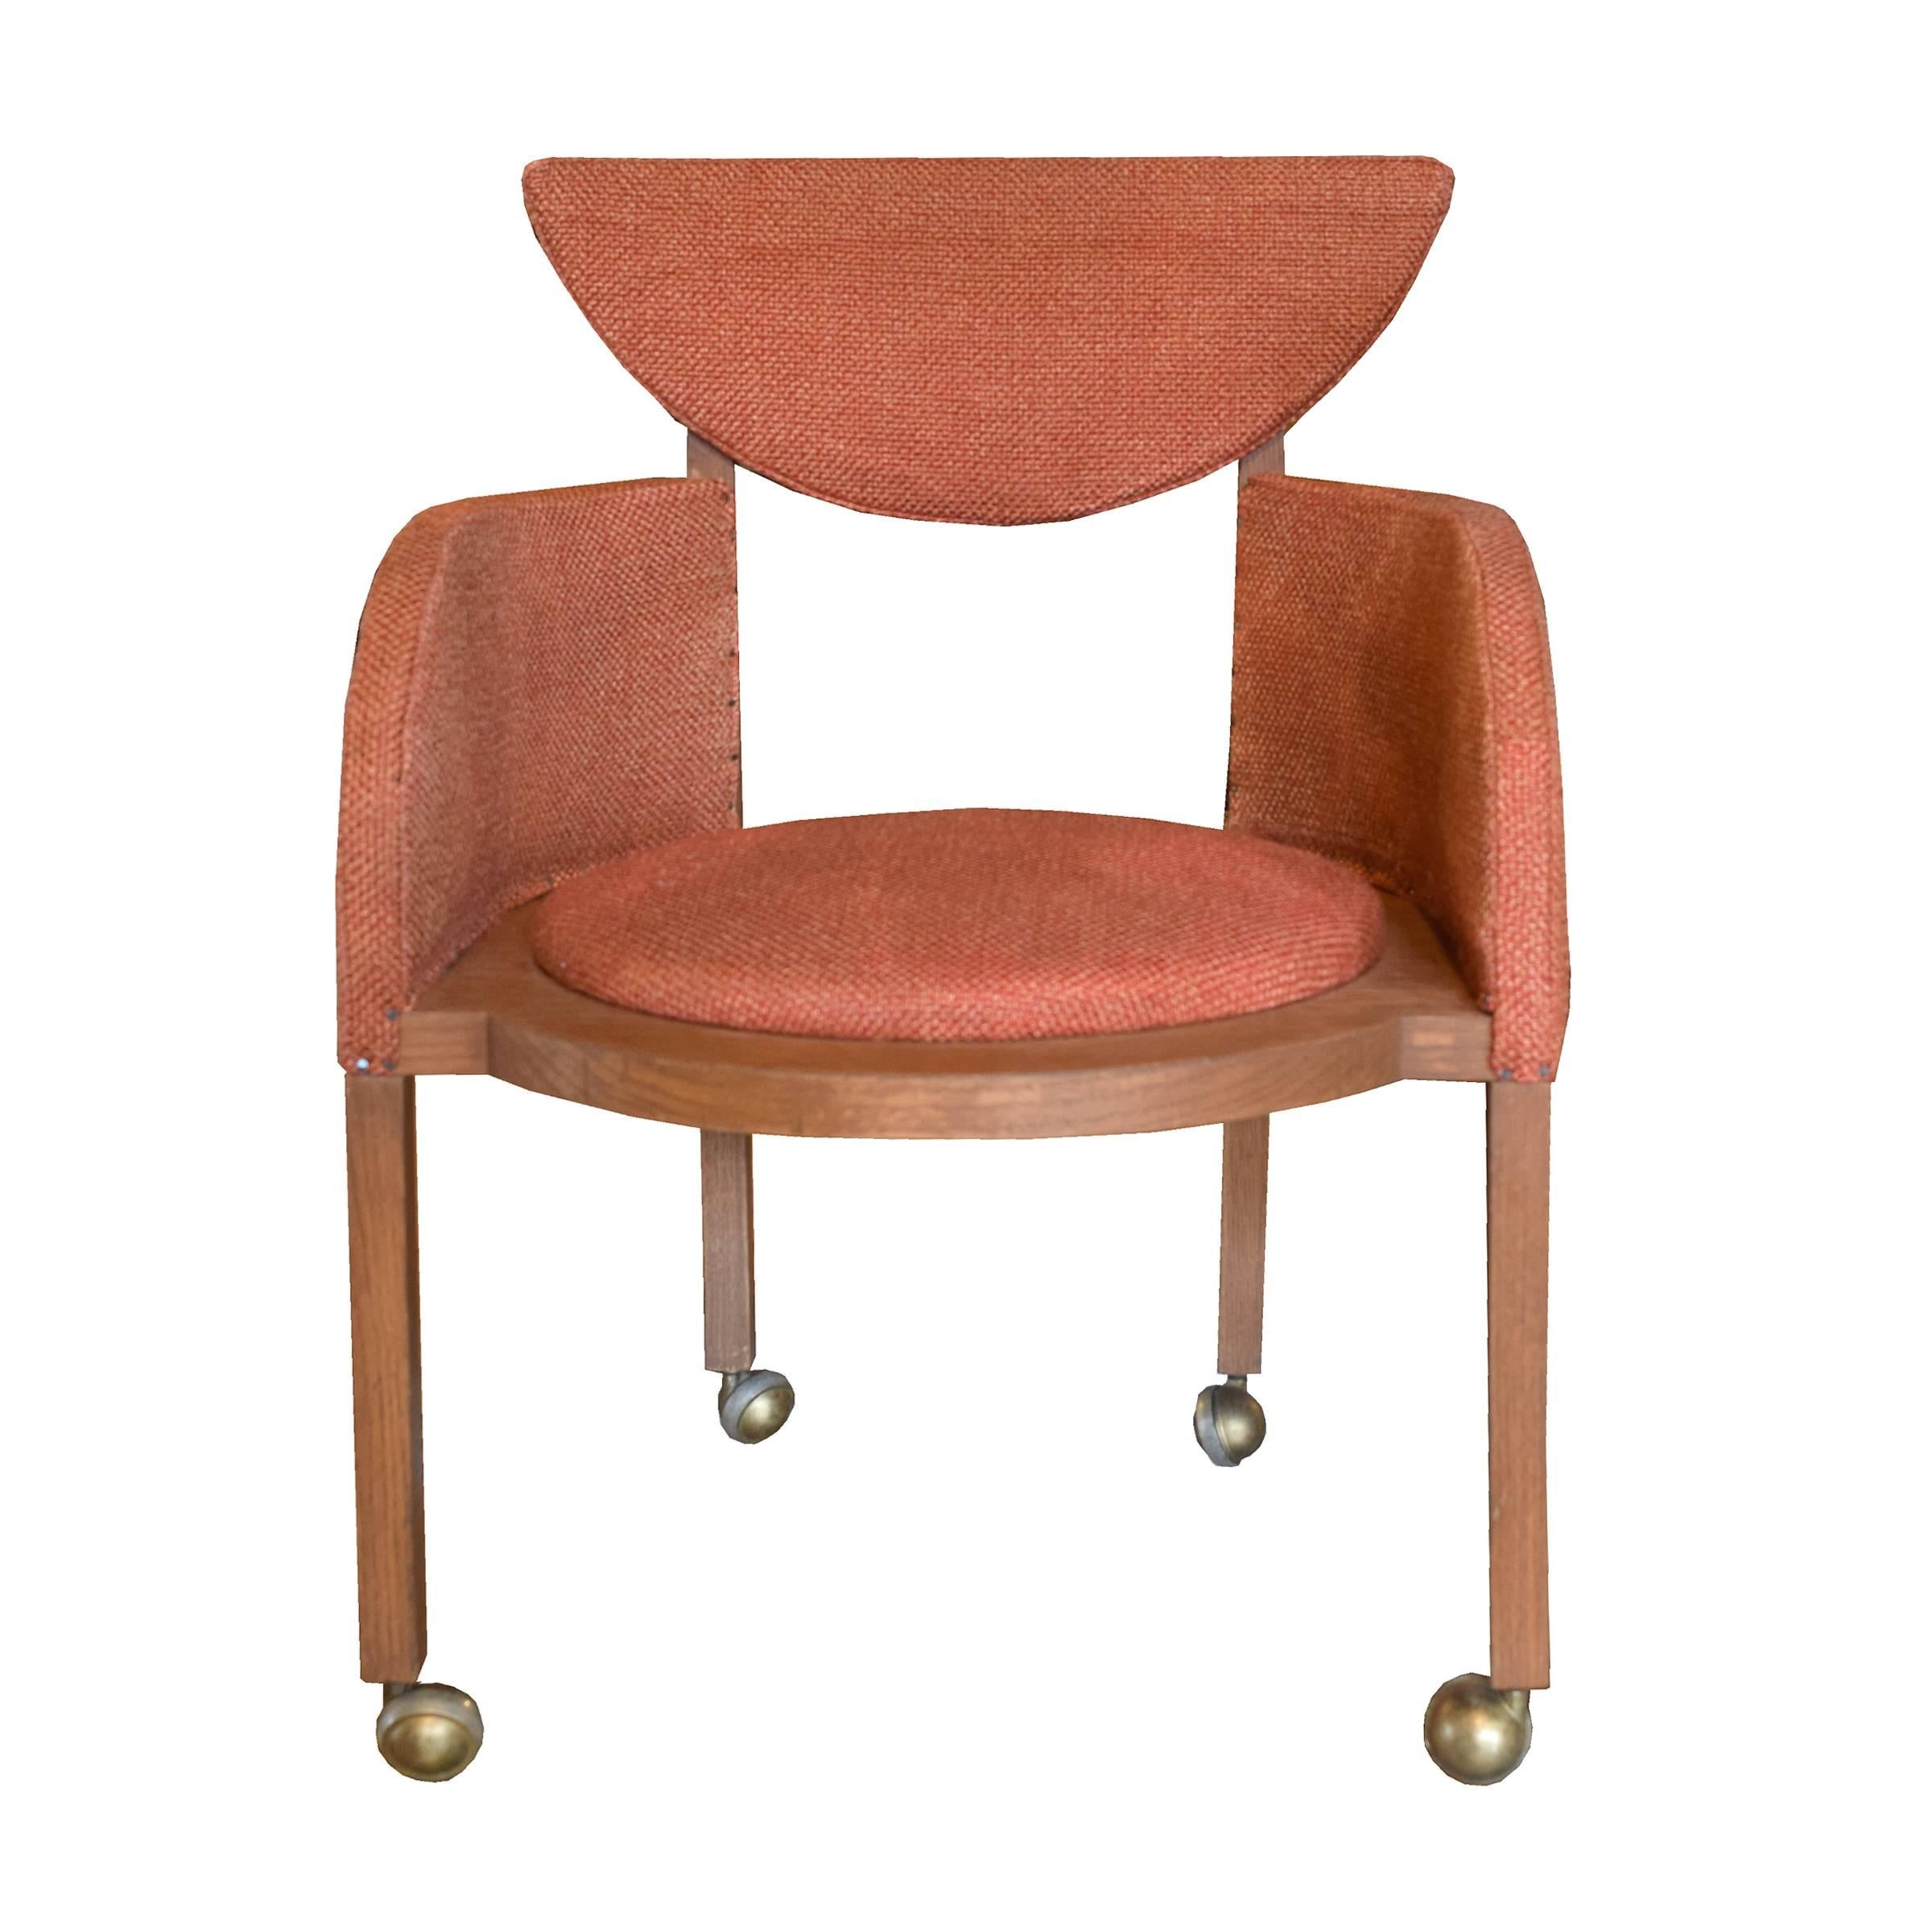 A pair of Frank Lloyd Wright designed armchairs with original upholstery and casters from the Riverview View Terrace Restaurant in Spring Green, WI. The restaurant, built in 1953, is across the street from Wright's Wisconsin home and studio,